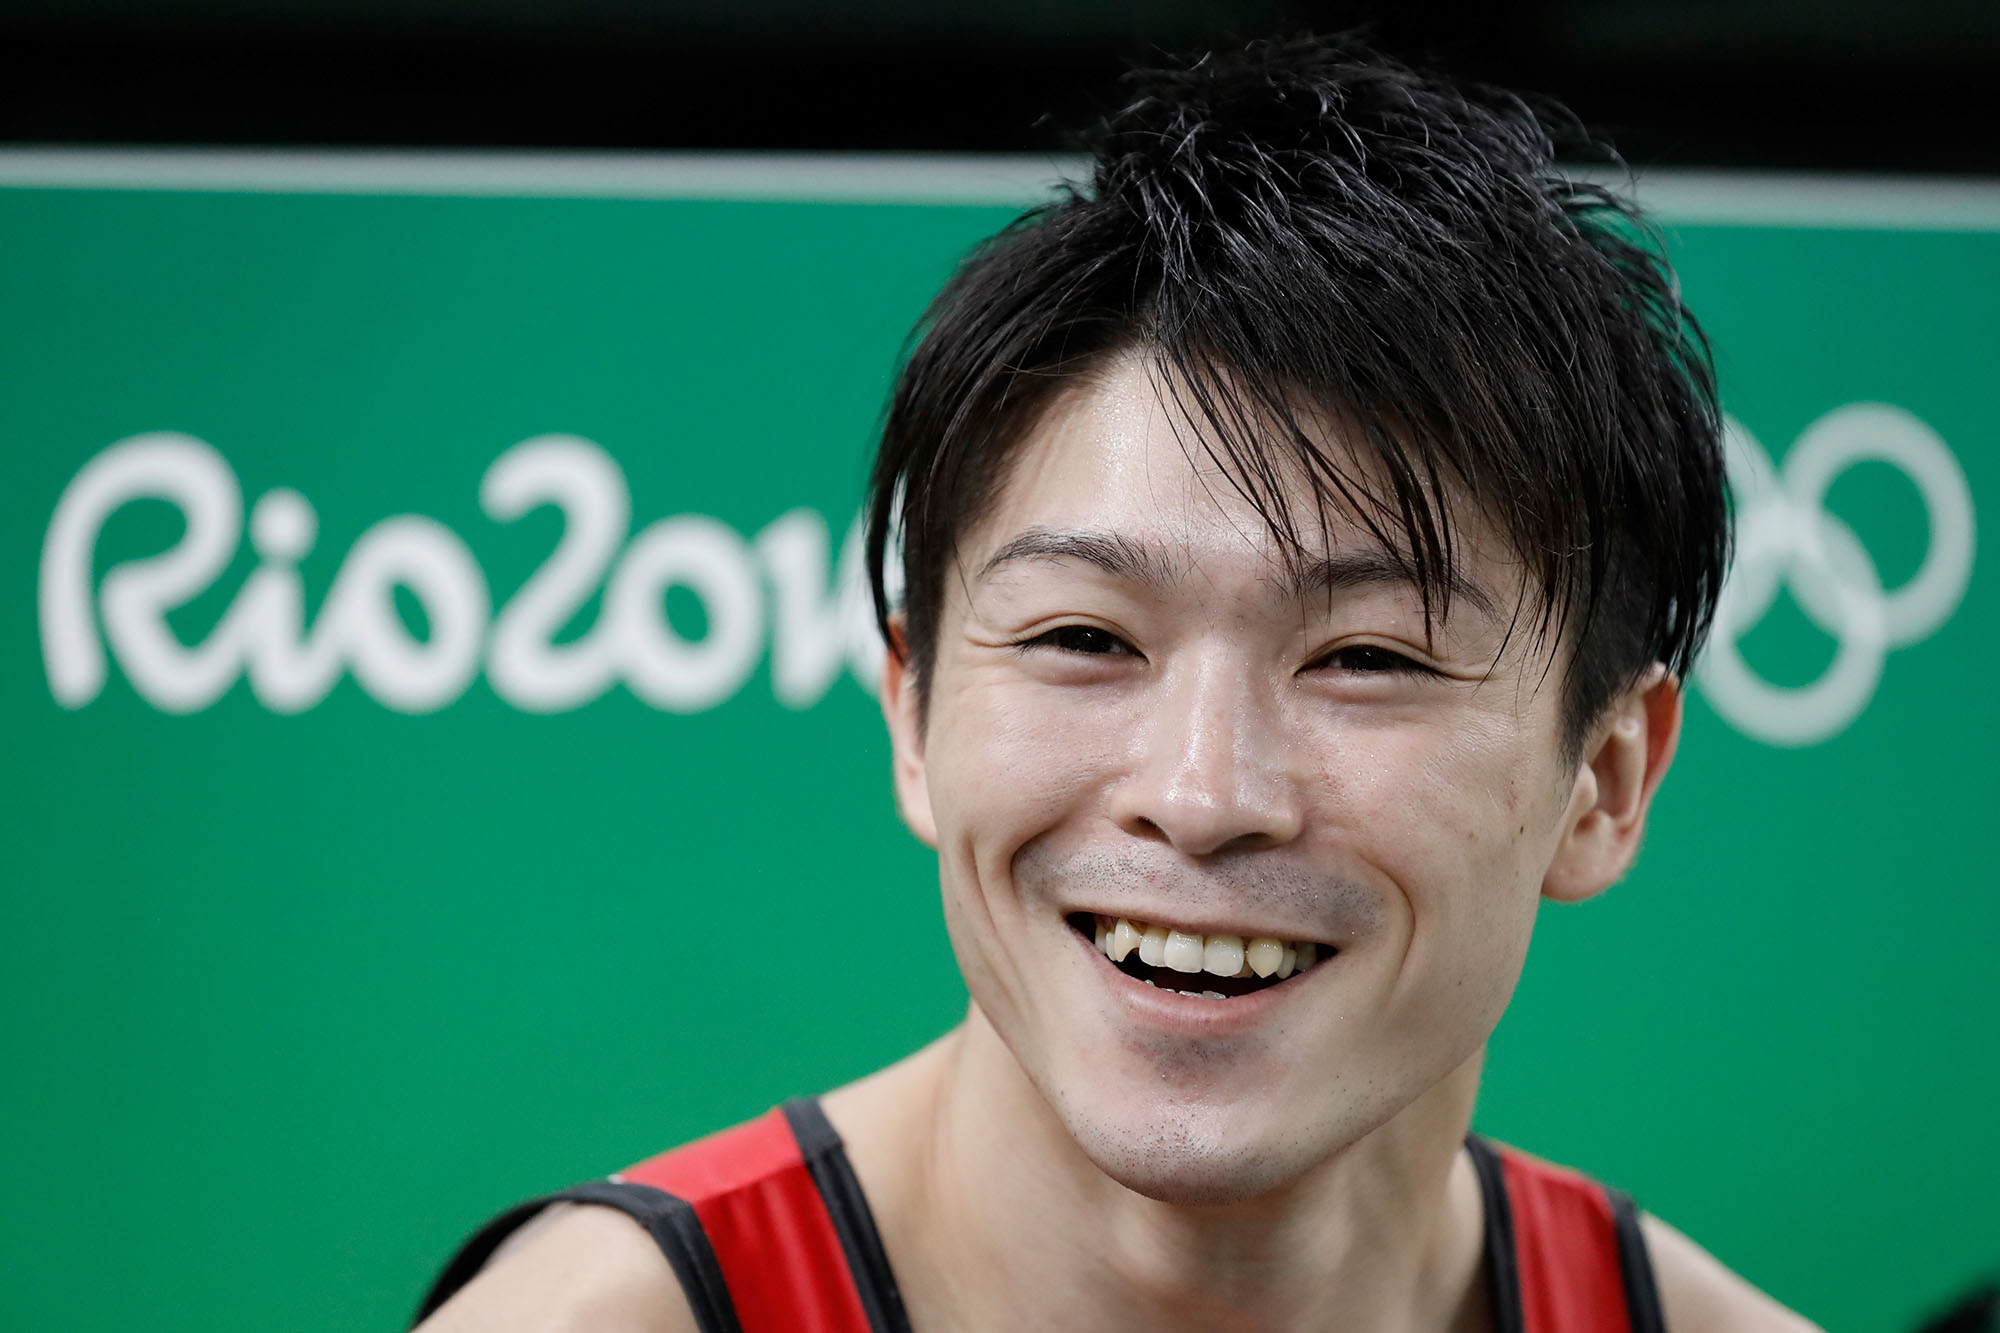 Japan's Kohei Uchimura smiles during a practice session of the men's Artistic gymnastics at the Olympic Arena on August 3, 2016 ahead of the Rio 2016 Olympic Games in Rio de Janeiro. / AFP / Thomas COEX        (Photo credit should read THOMAS COEX/AFP/Getty Images) (THOMAS COEX&mdash;AFP/Getty Images)